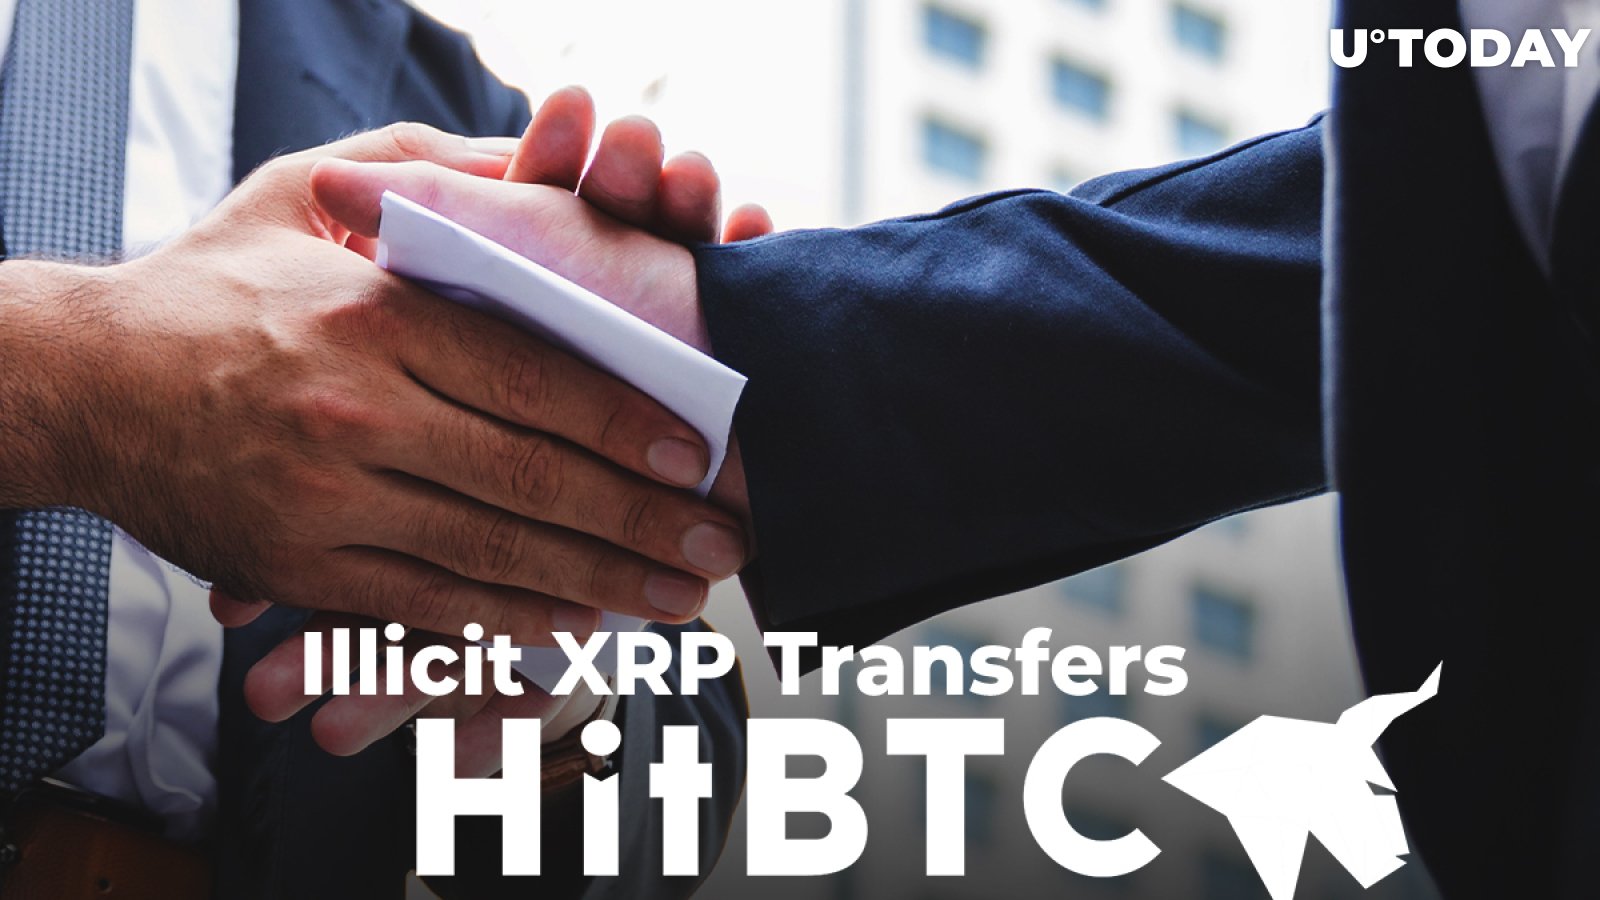 XRP Community Comes for HitBTC for Failing to Stop Illicit Transfers